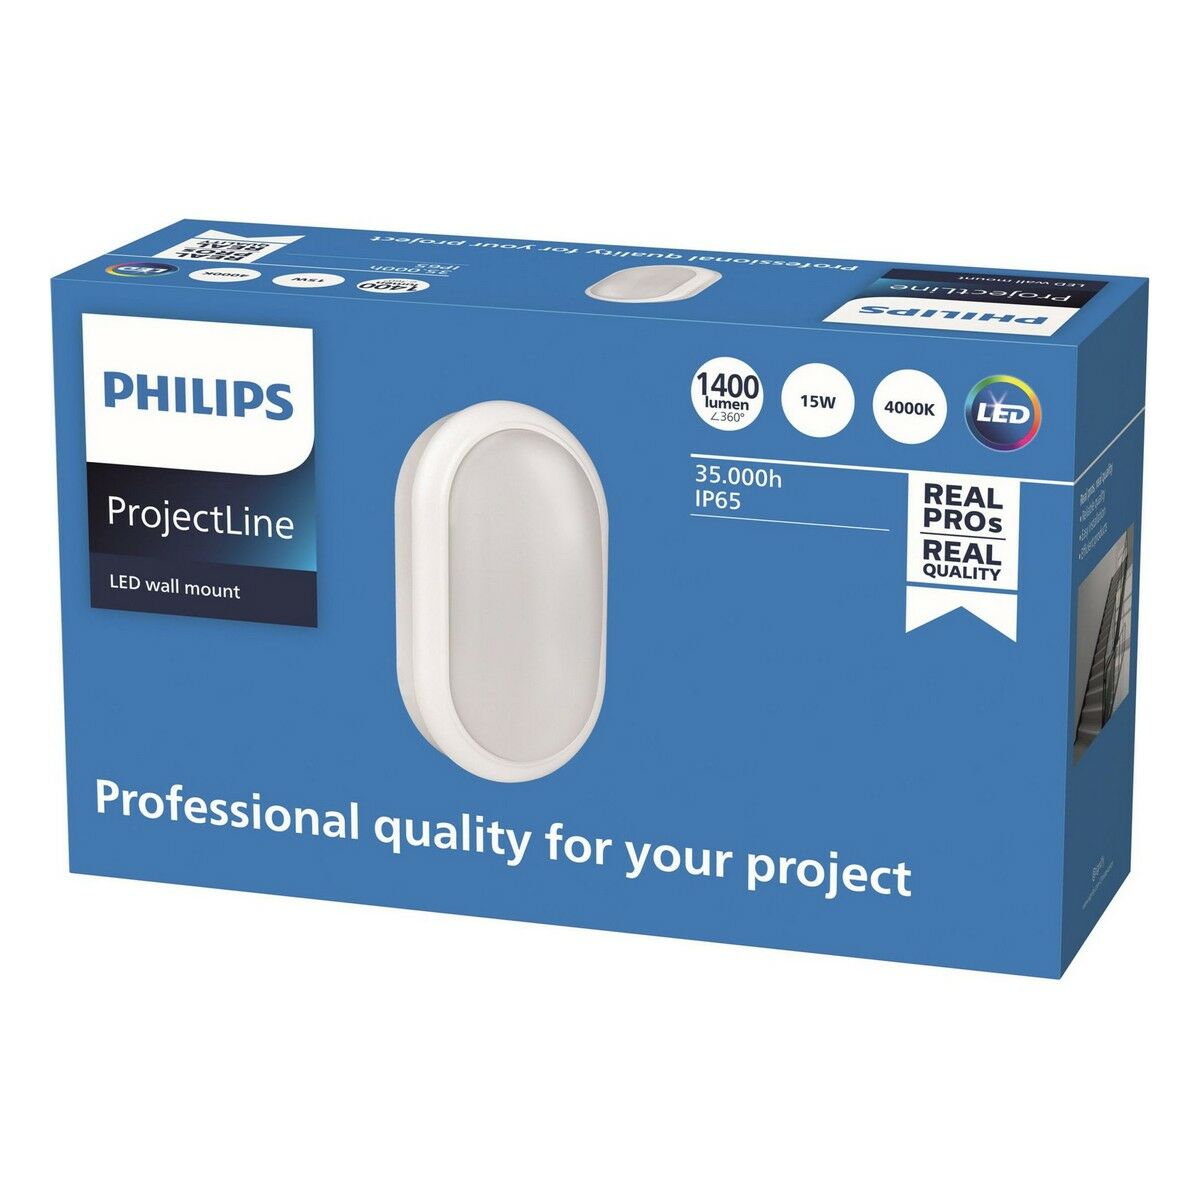 Muurlamp Philips Project Line 1400 lm